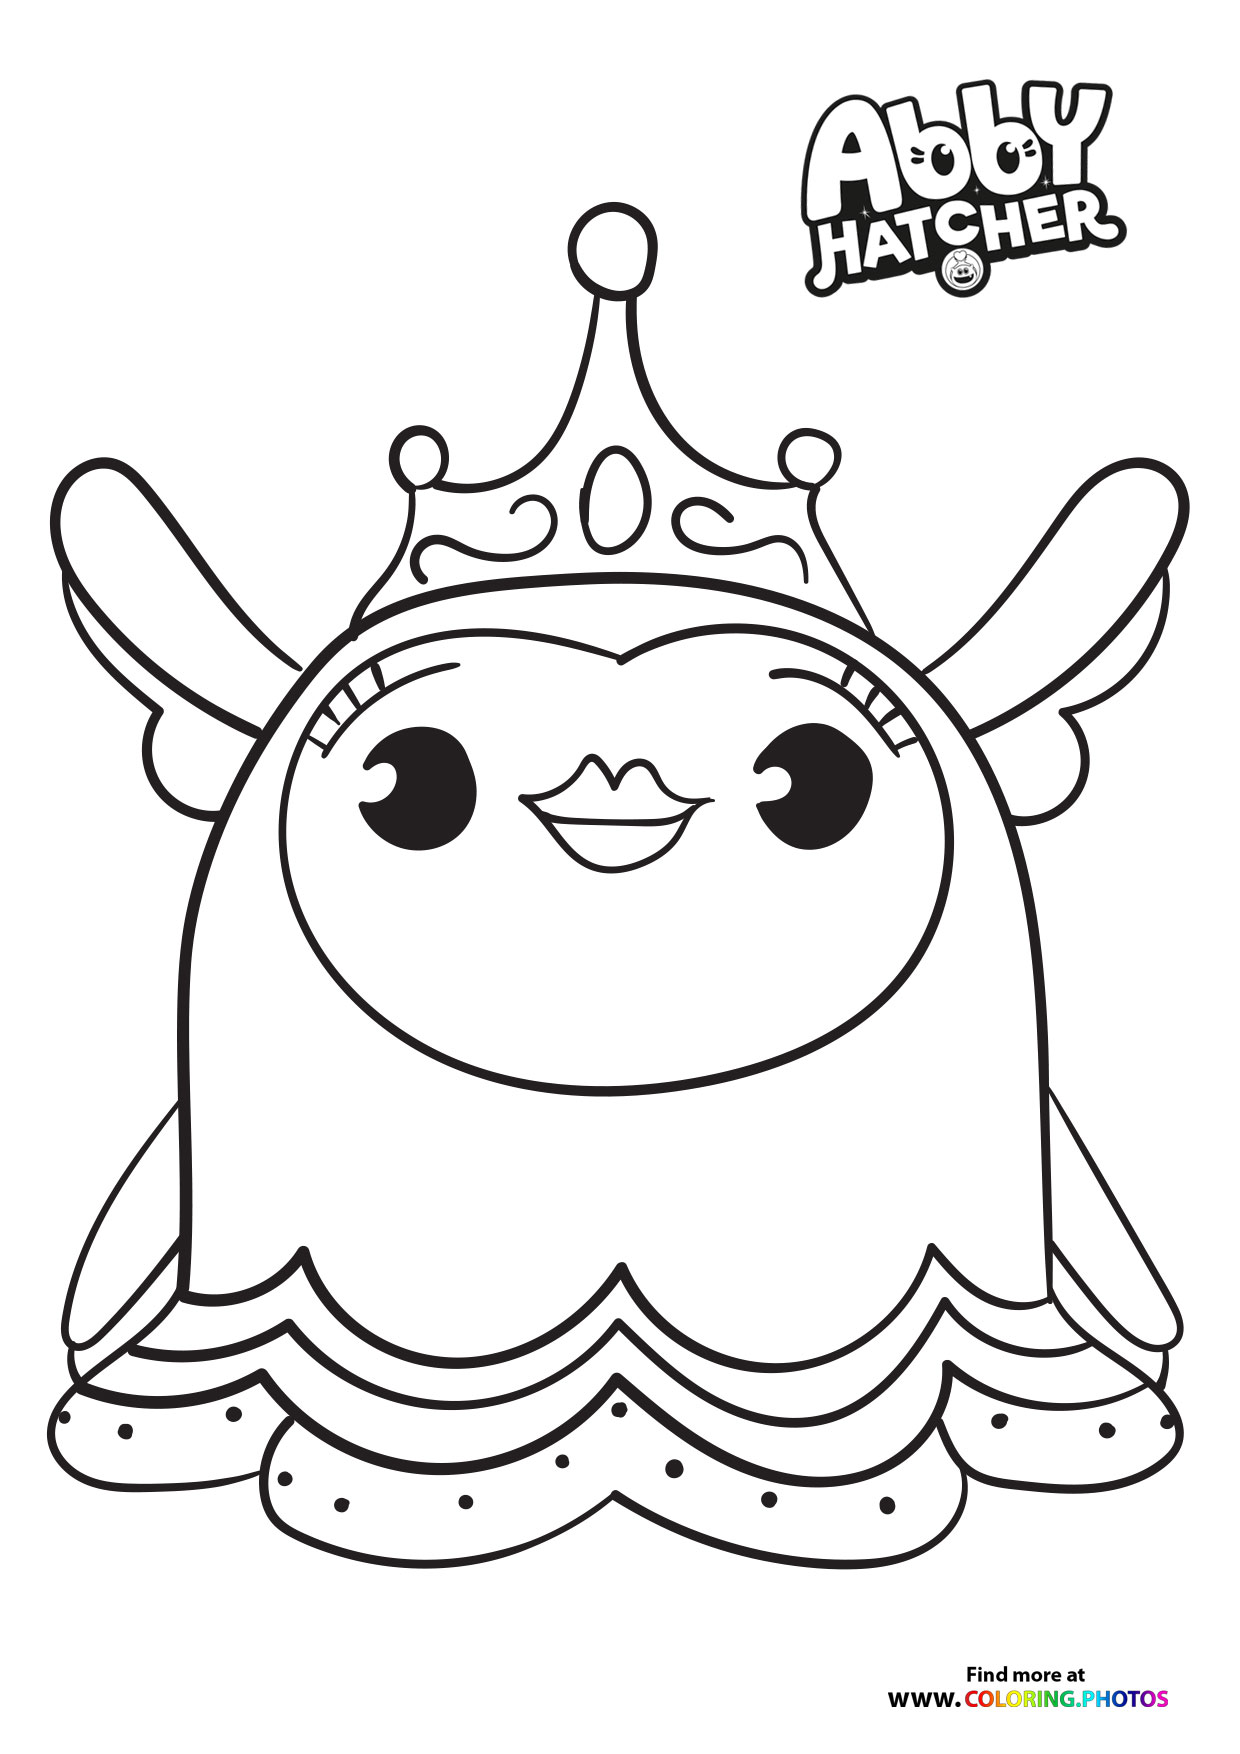 Abby Hatcher and Bozzly - Coloring Pages for kids